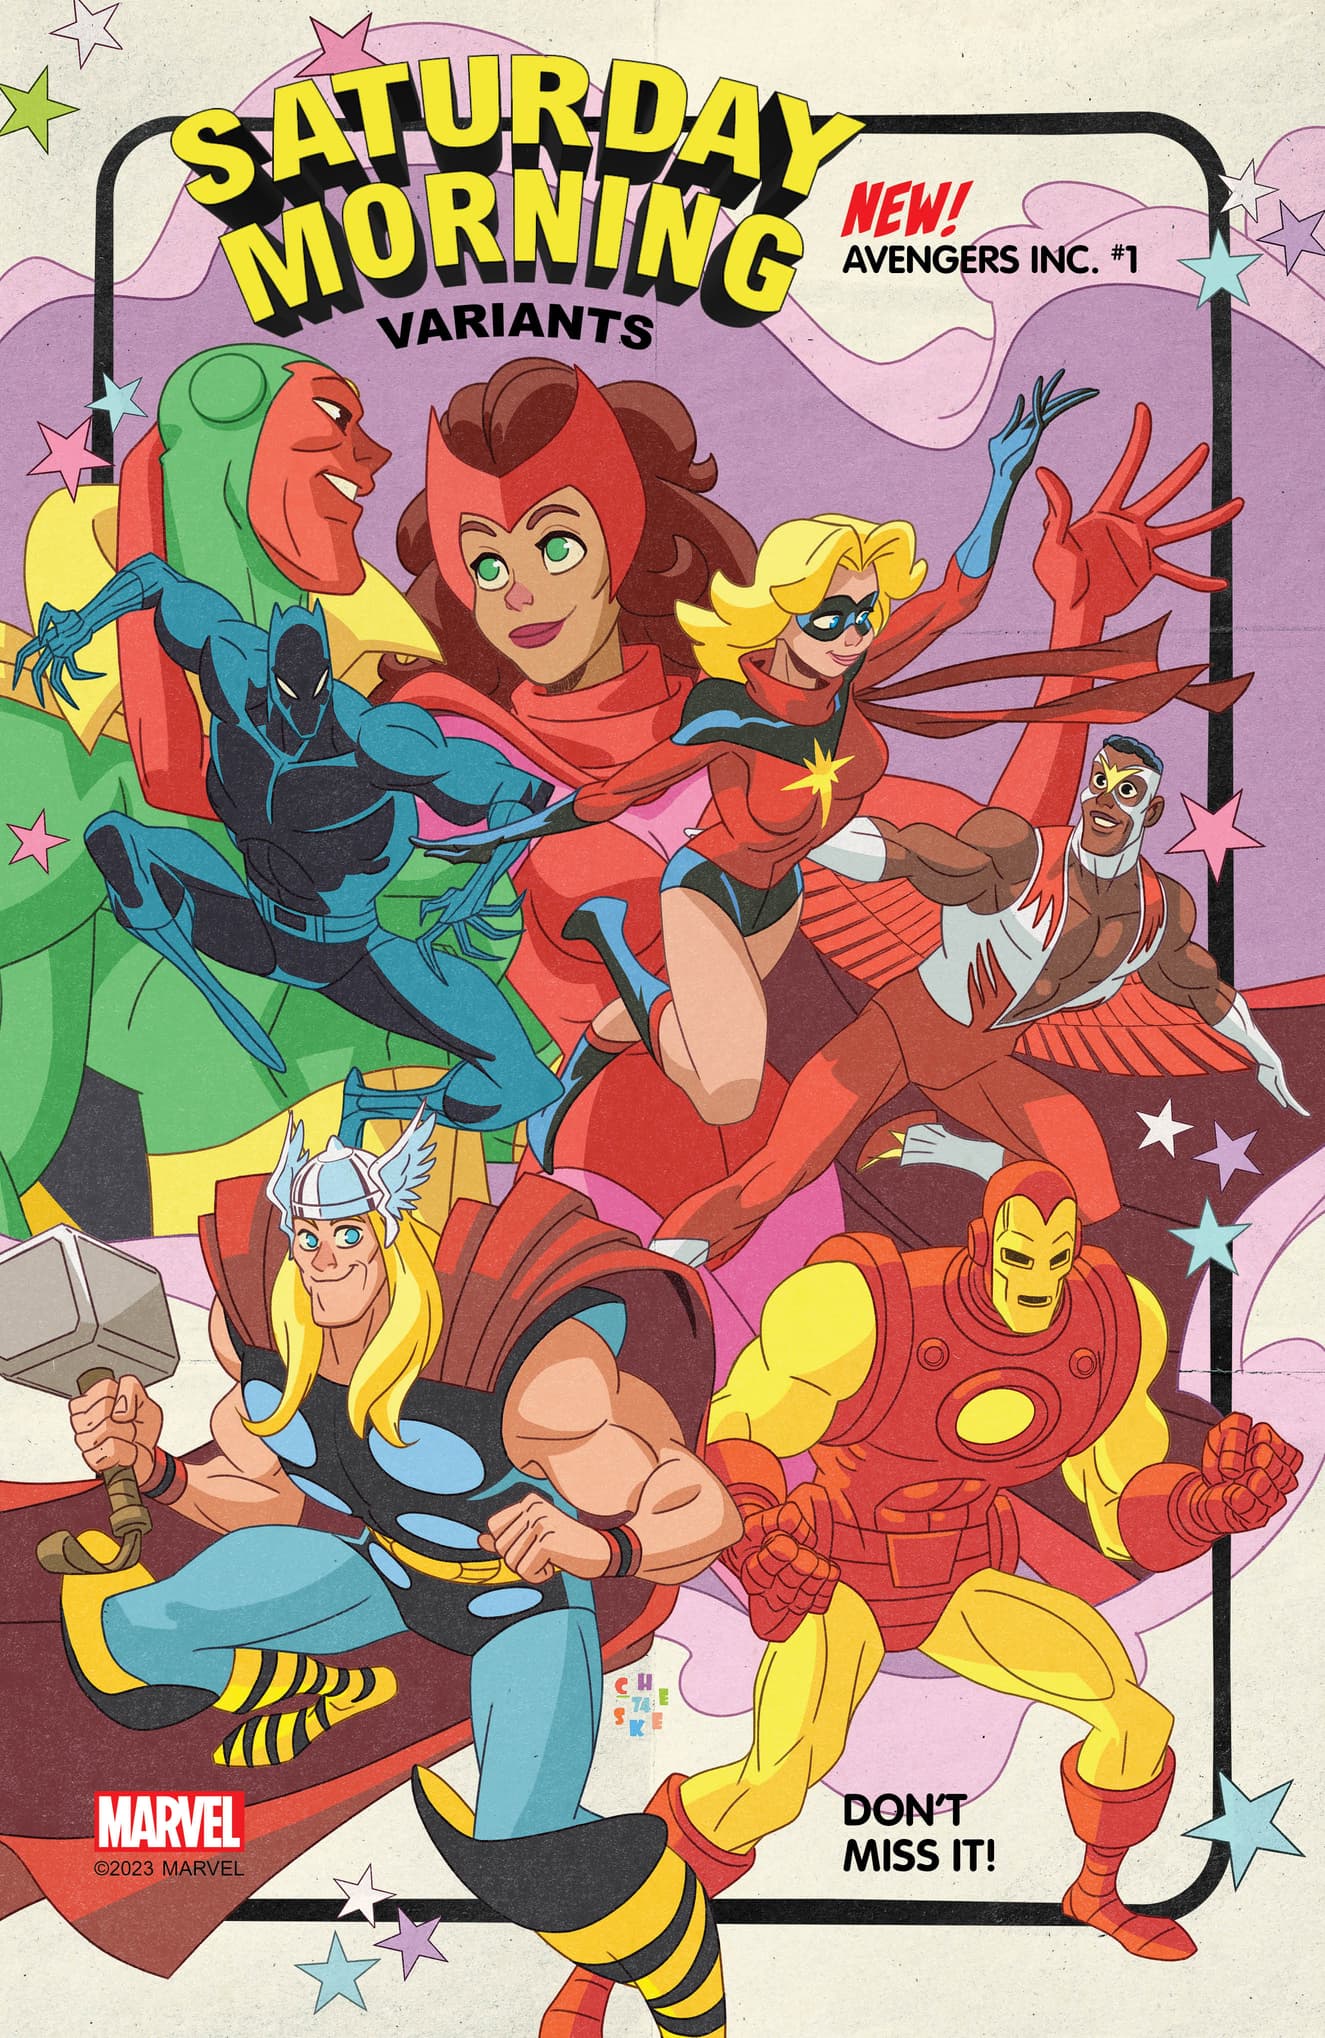 AVENGERS INC. #1 Saturday Morning Variant Cover by Sean Galloway